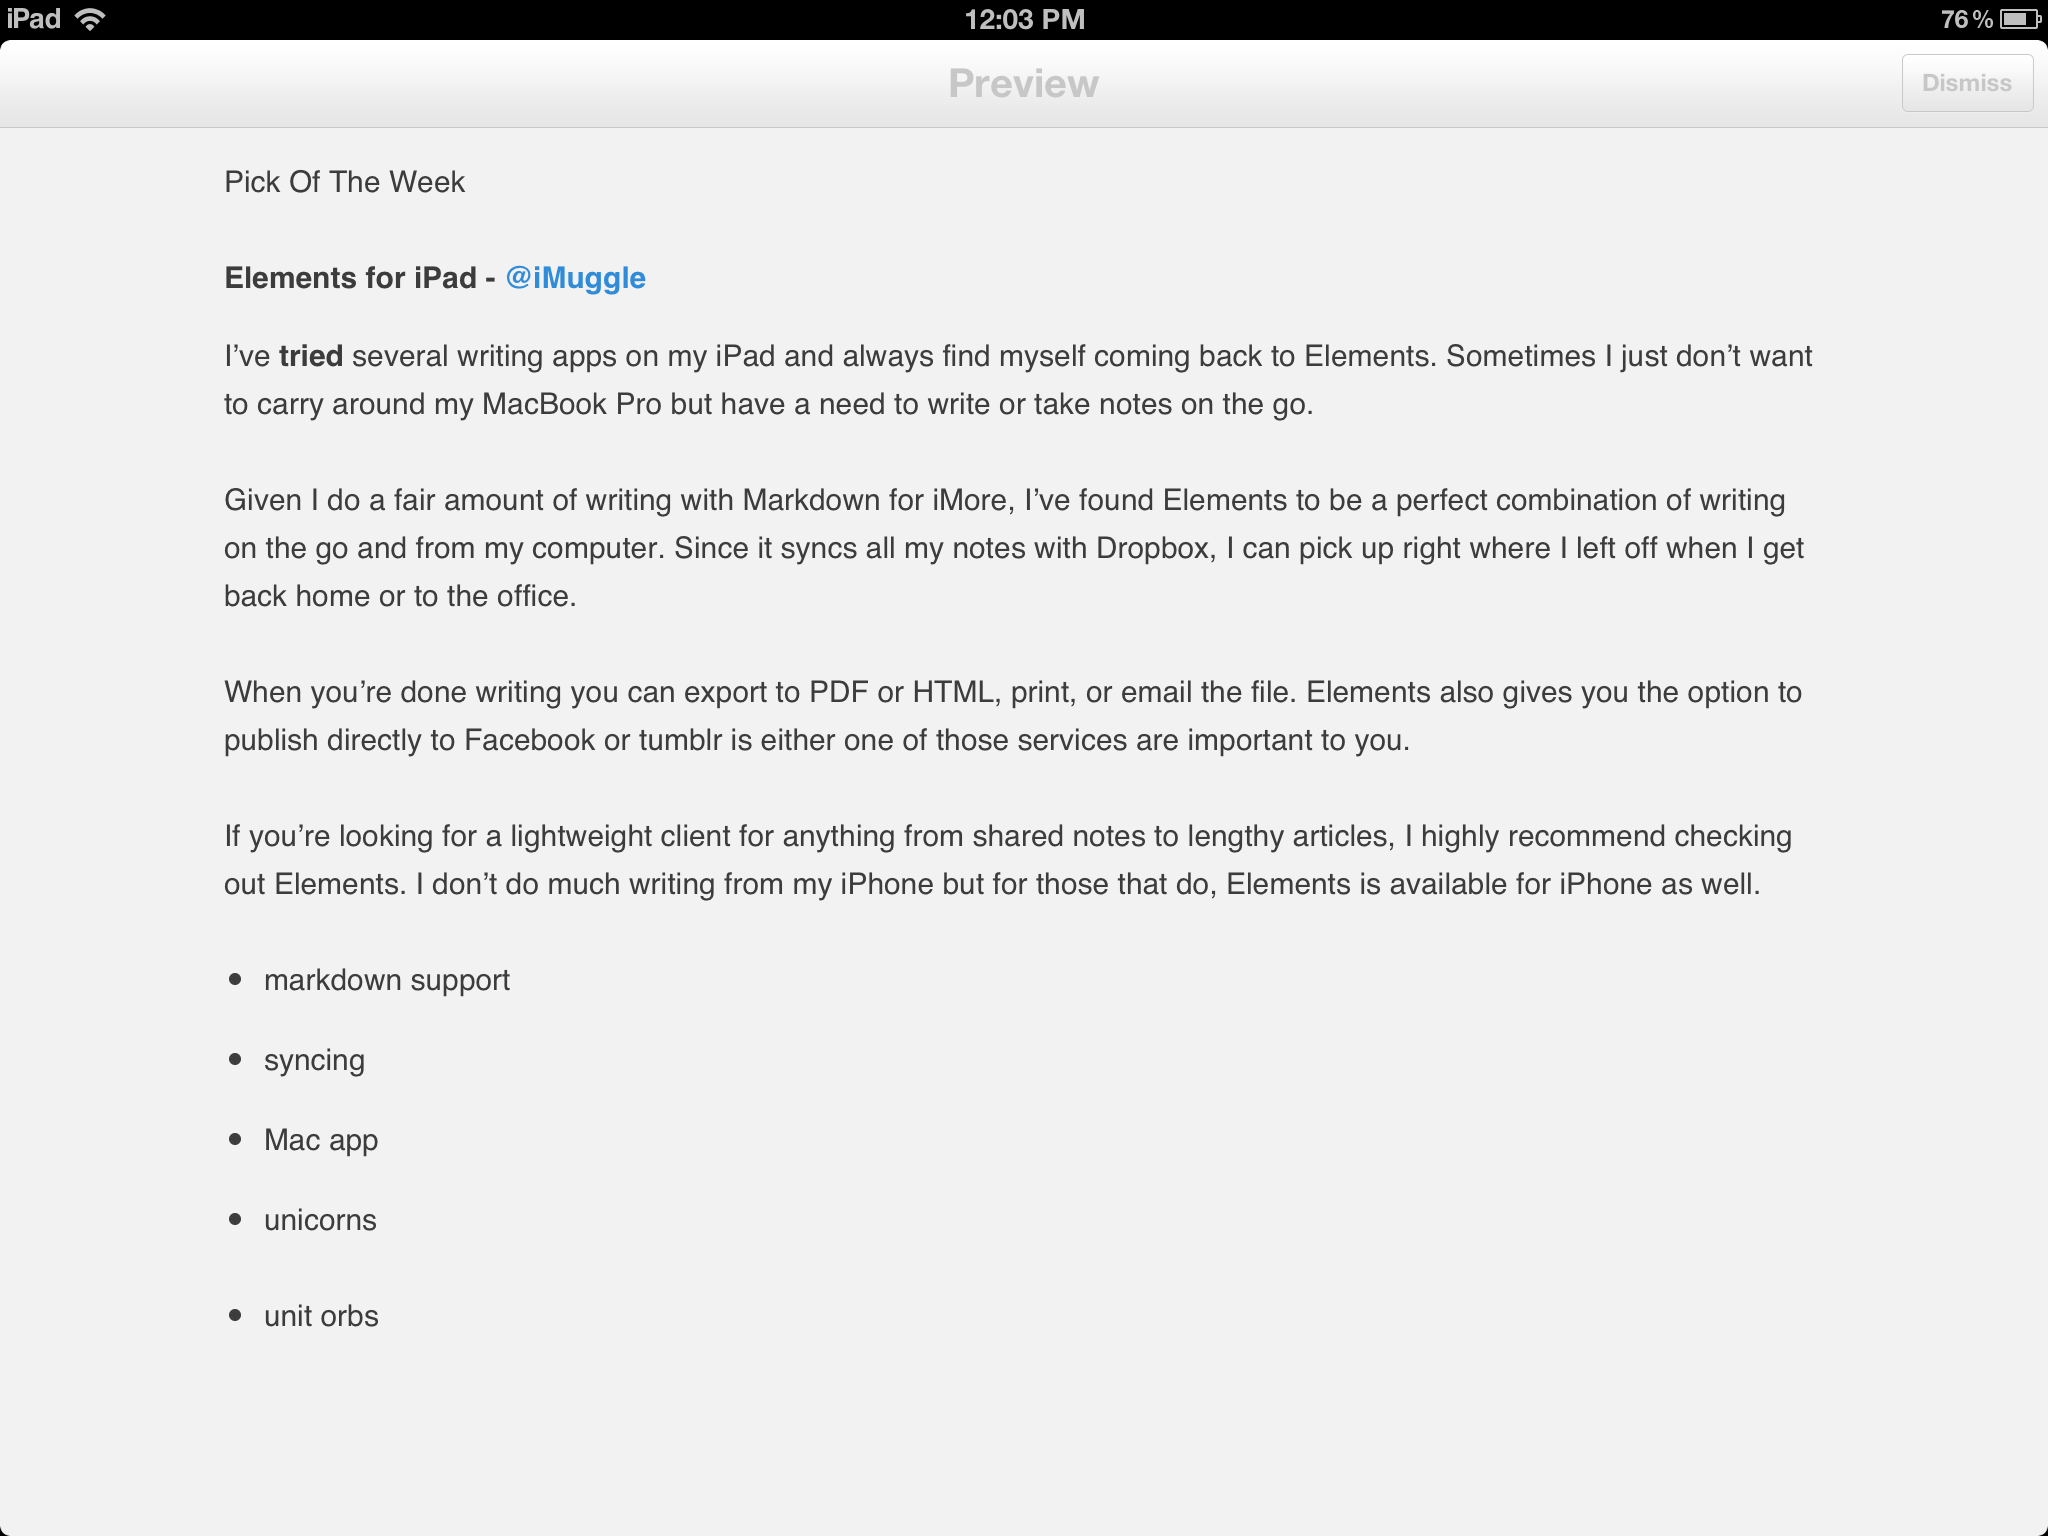 Byword Markdown support for iPad